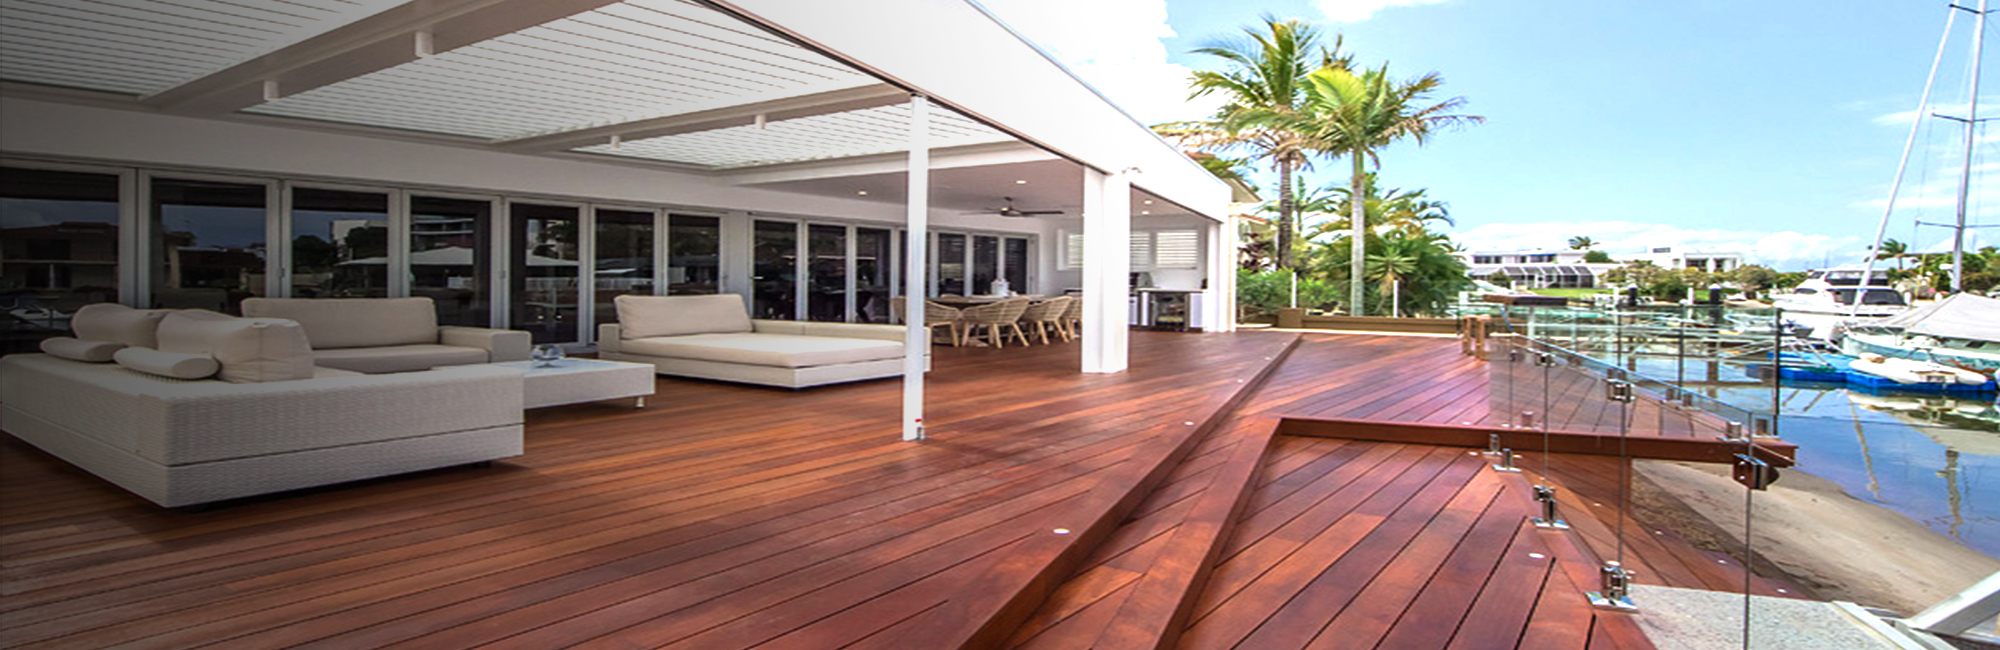 How can a deck add value to my home?